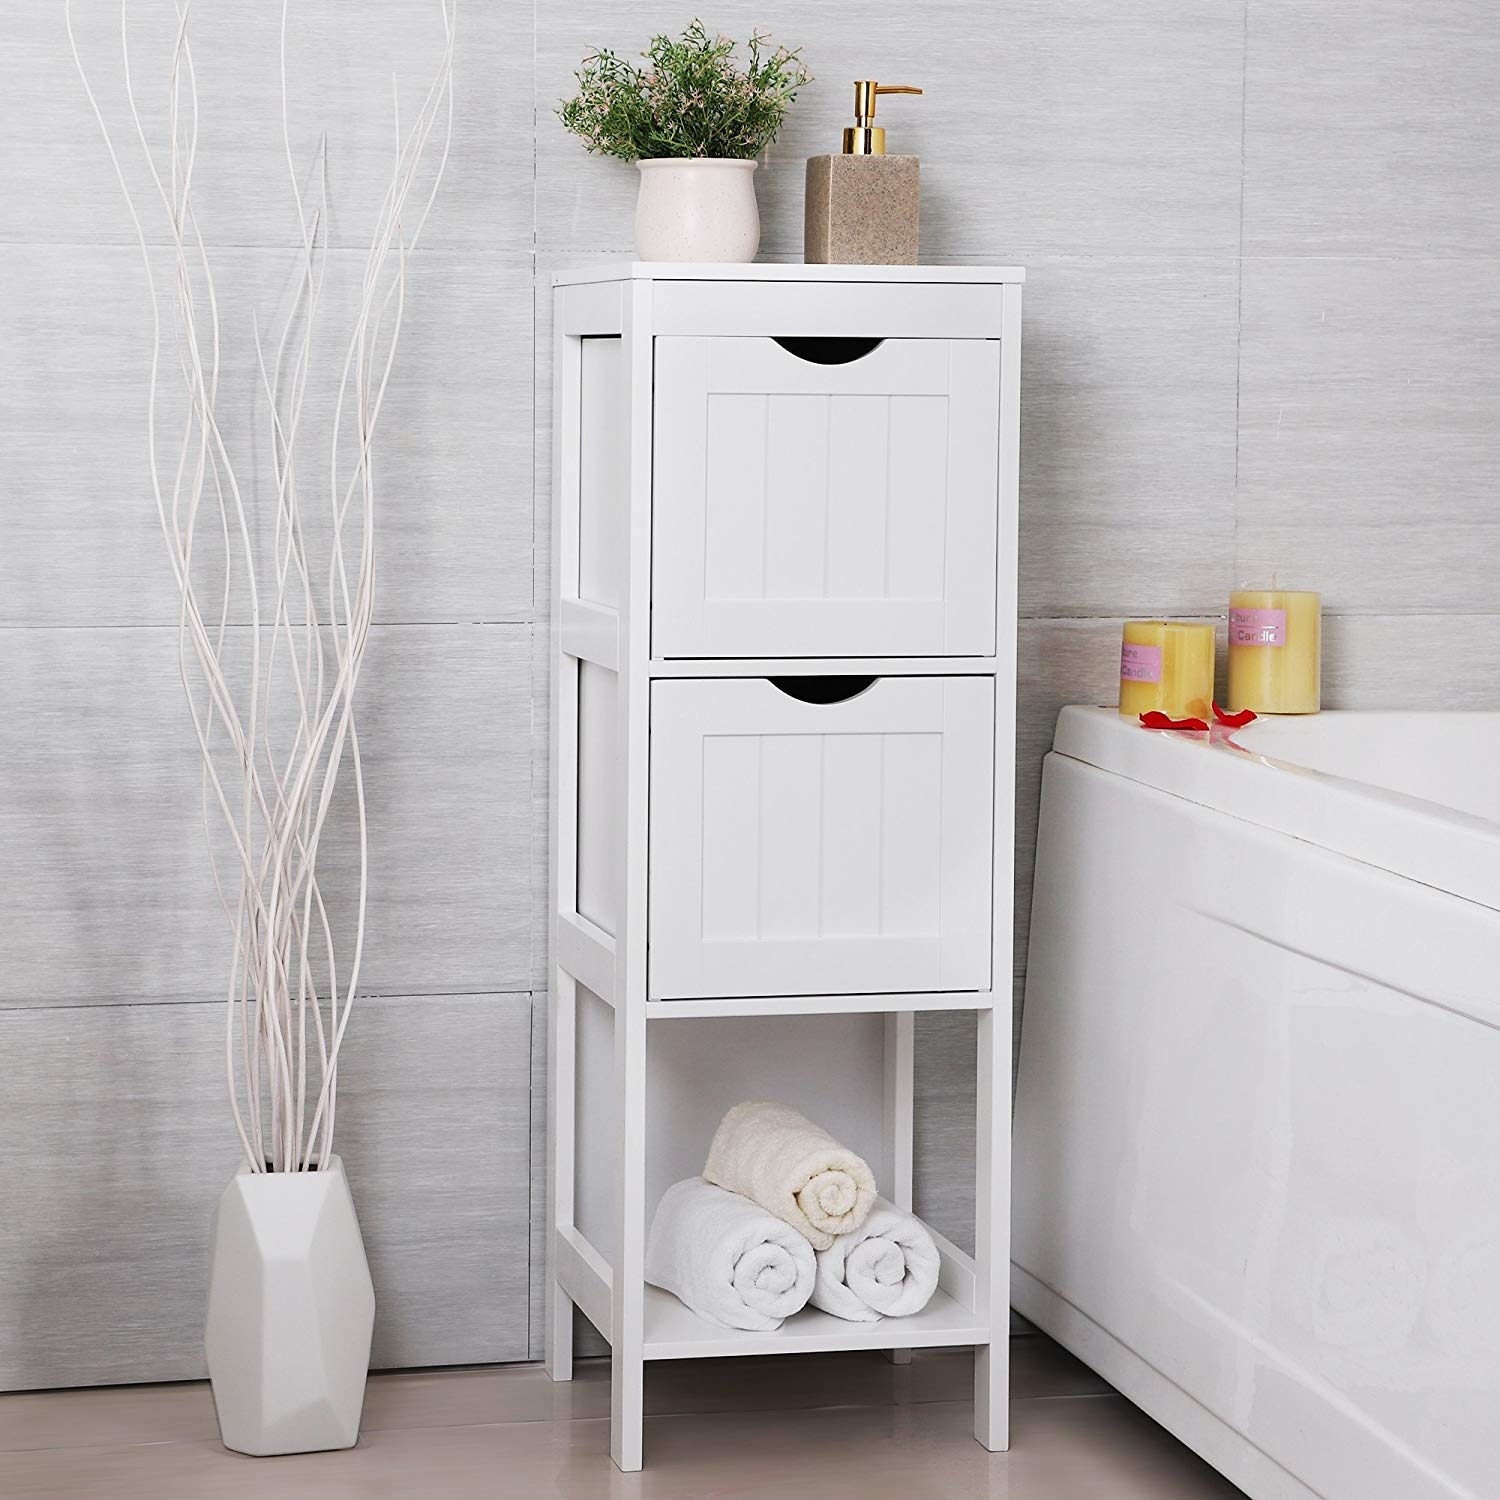 Wooden Side Cupboard with 2 Drawers and Open Front Storage Compartment White Warmiehomy Bathroom Storage Cabinet Organiser Floor Standing Corner Unit 